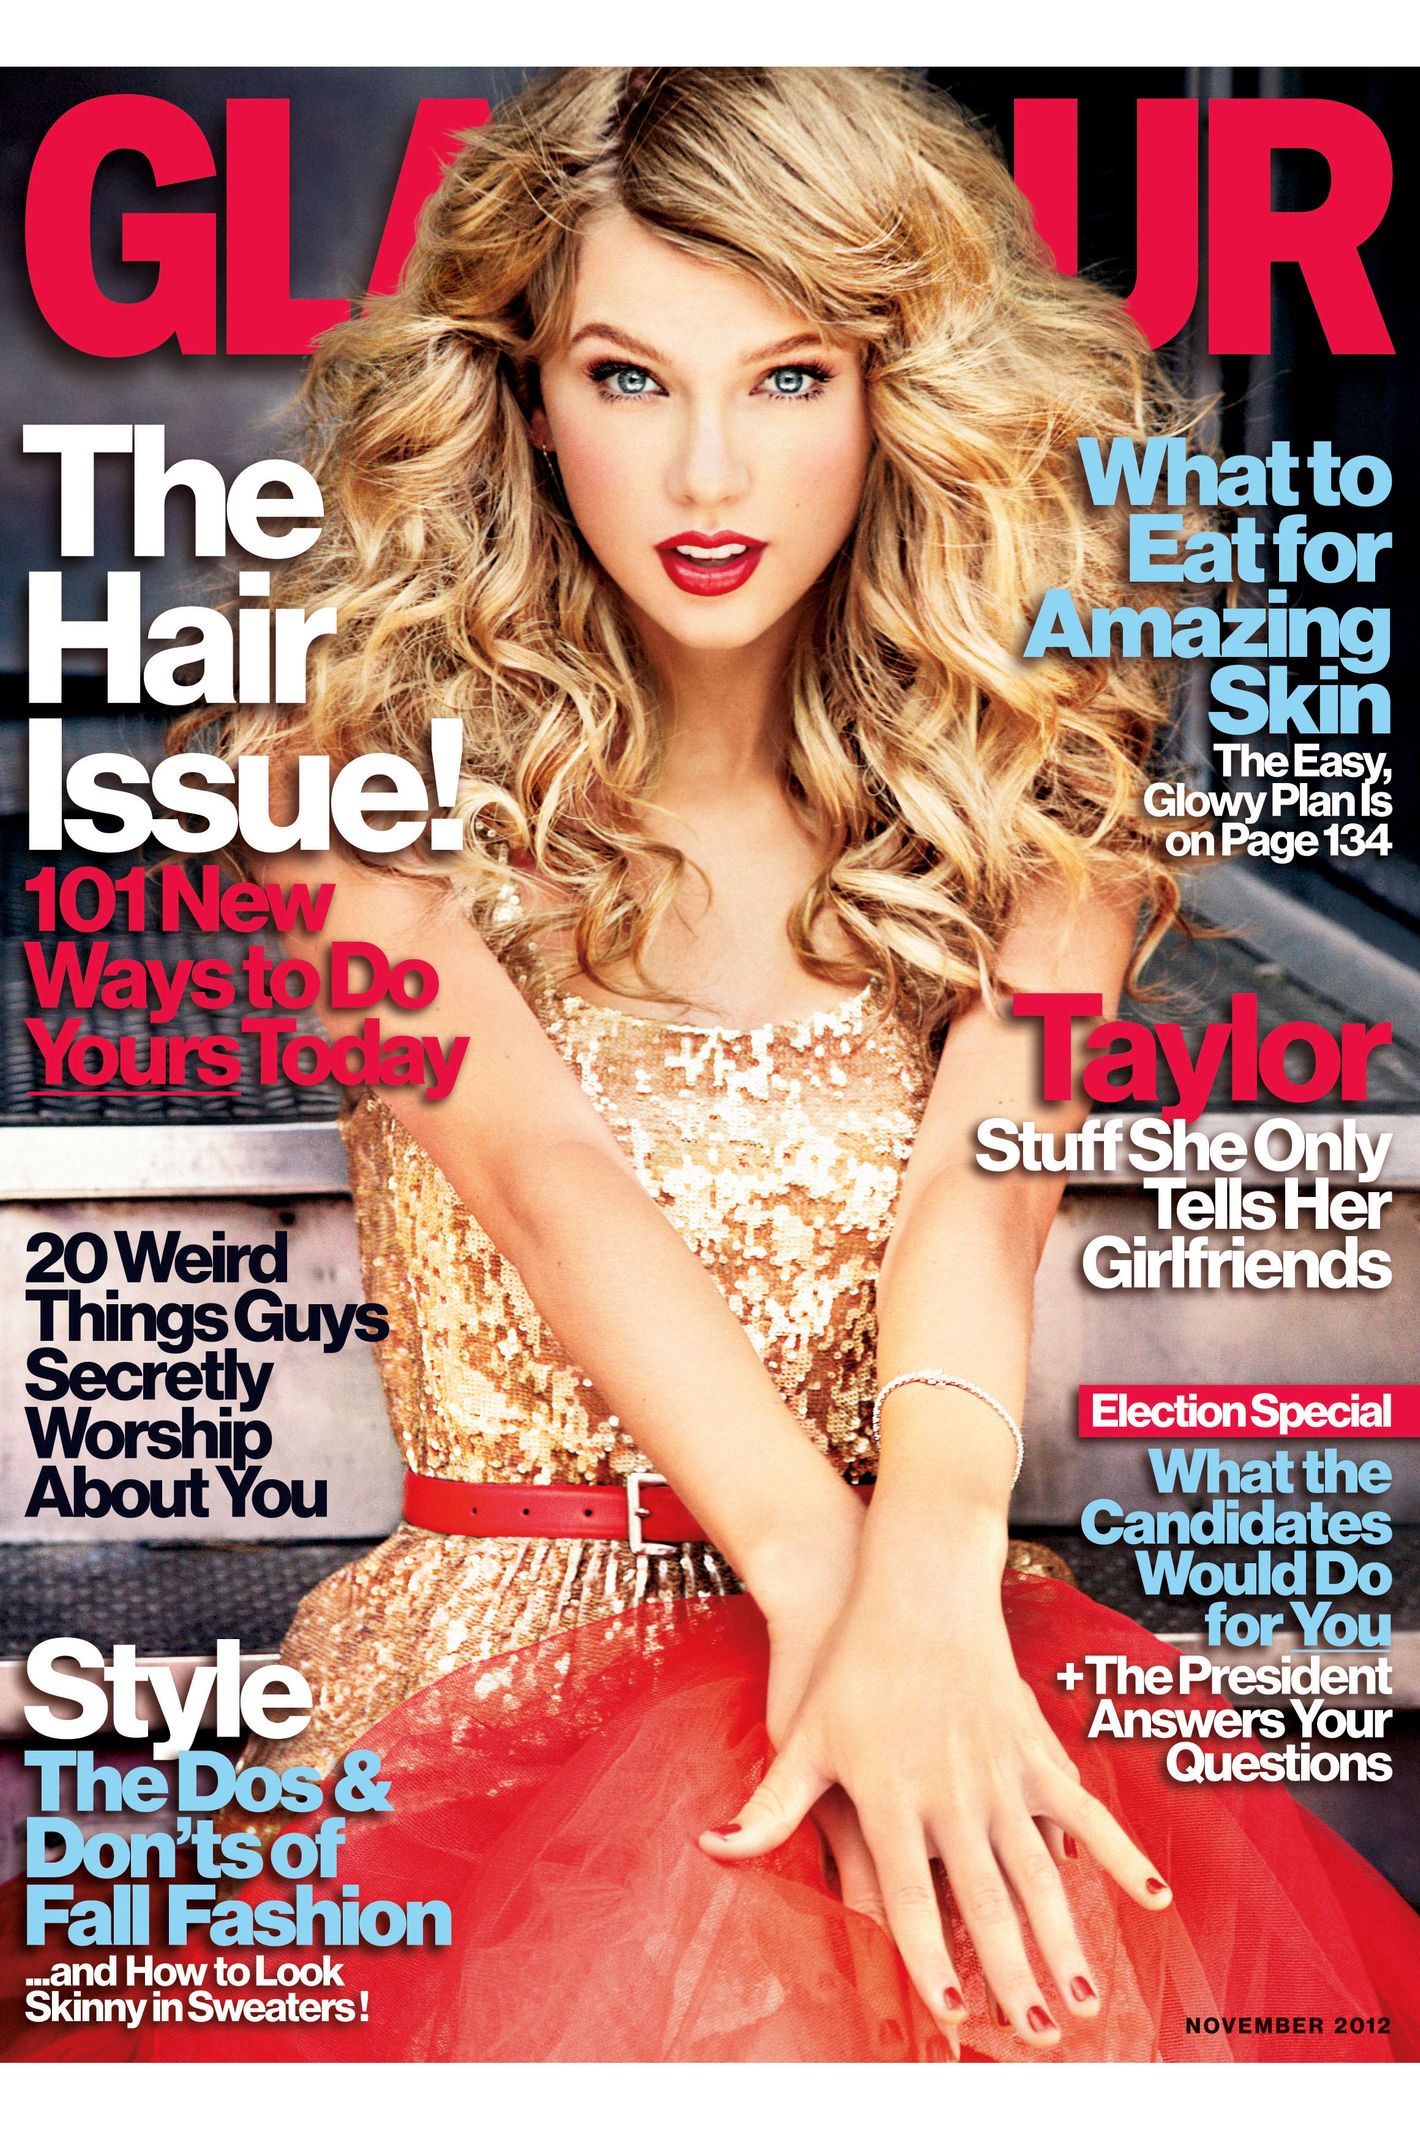 Obama Shares Glamour Cover With Taylor Swifts Surprise Face pic